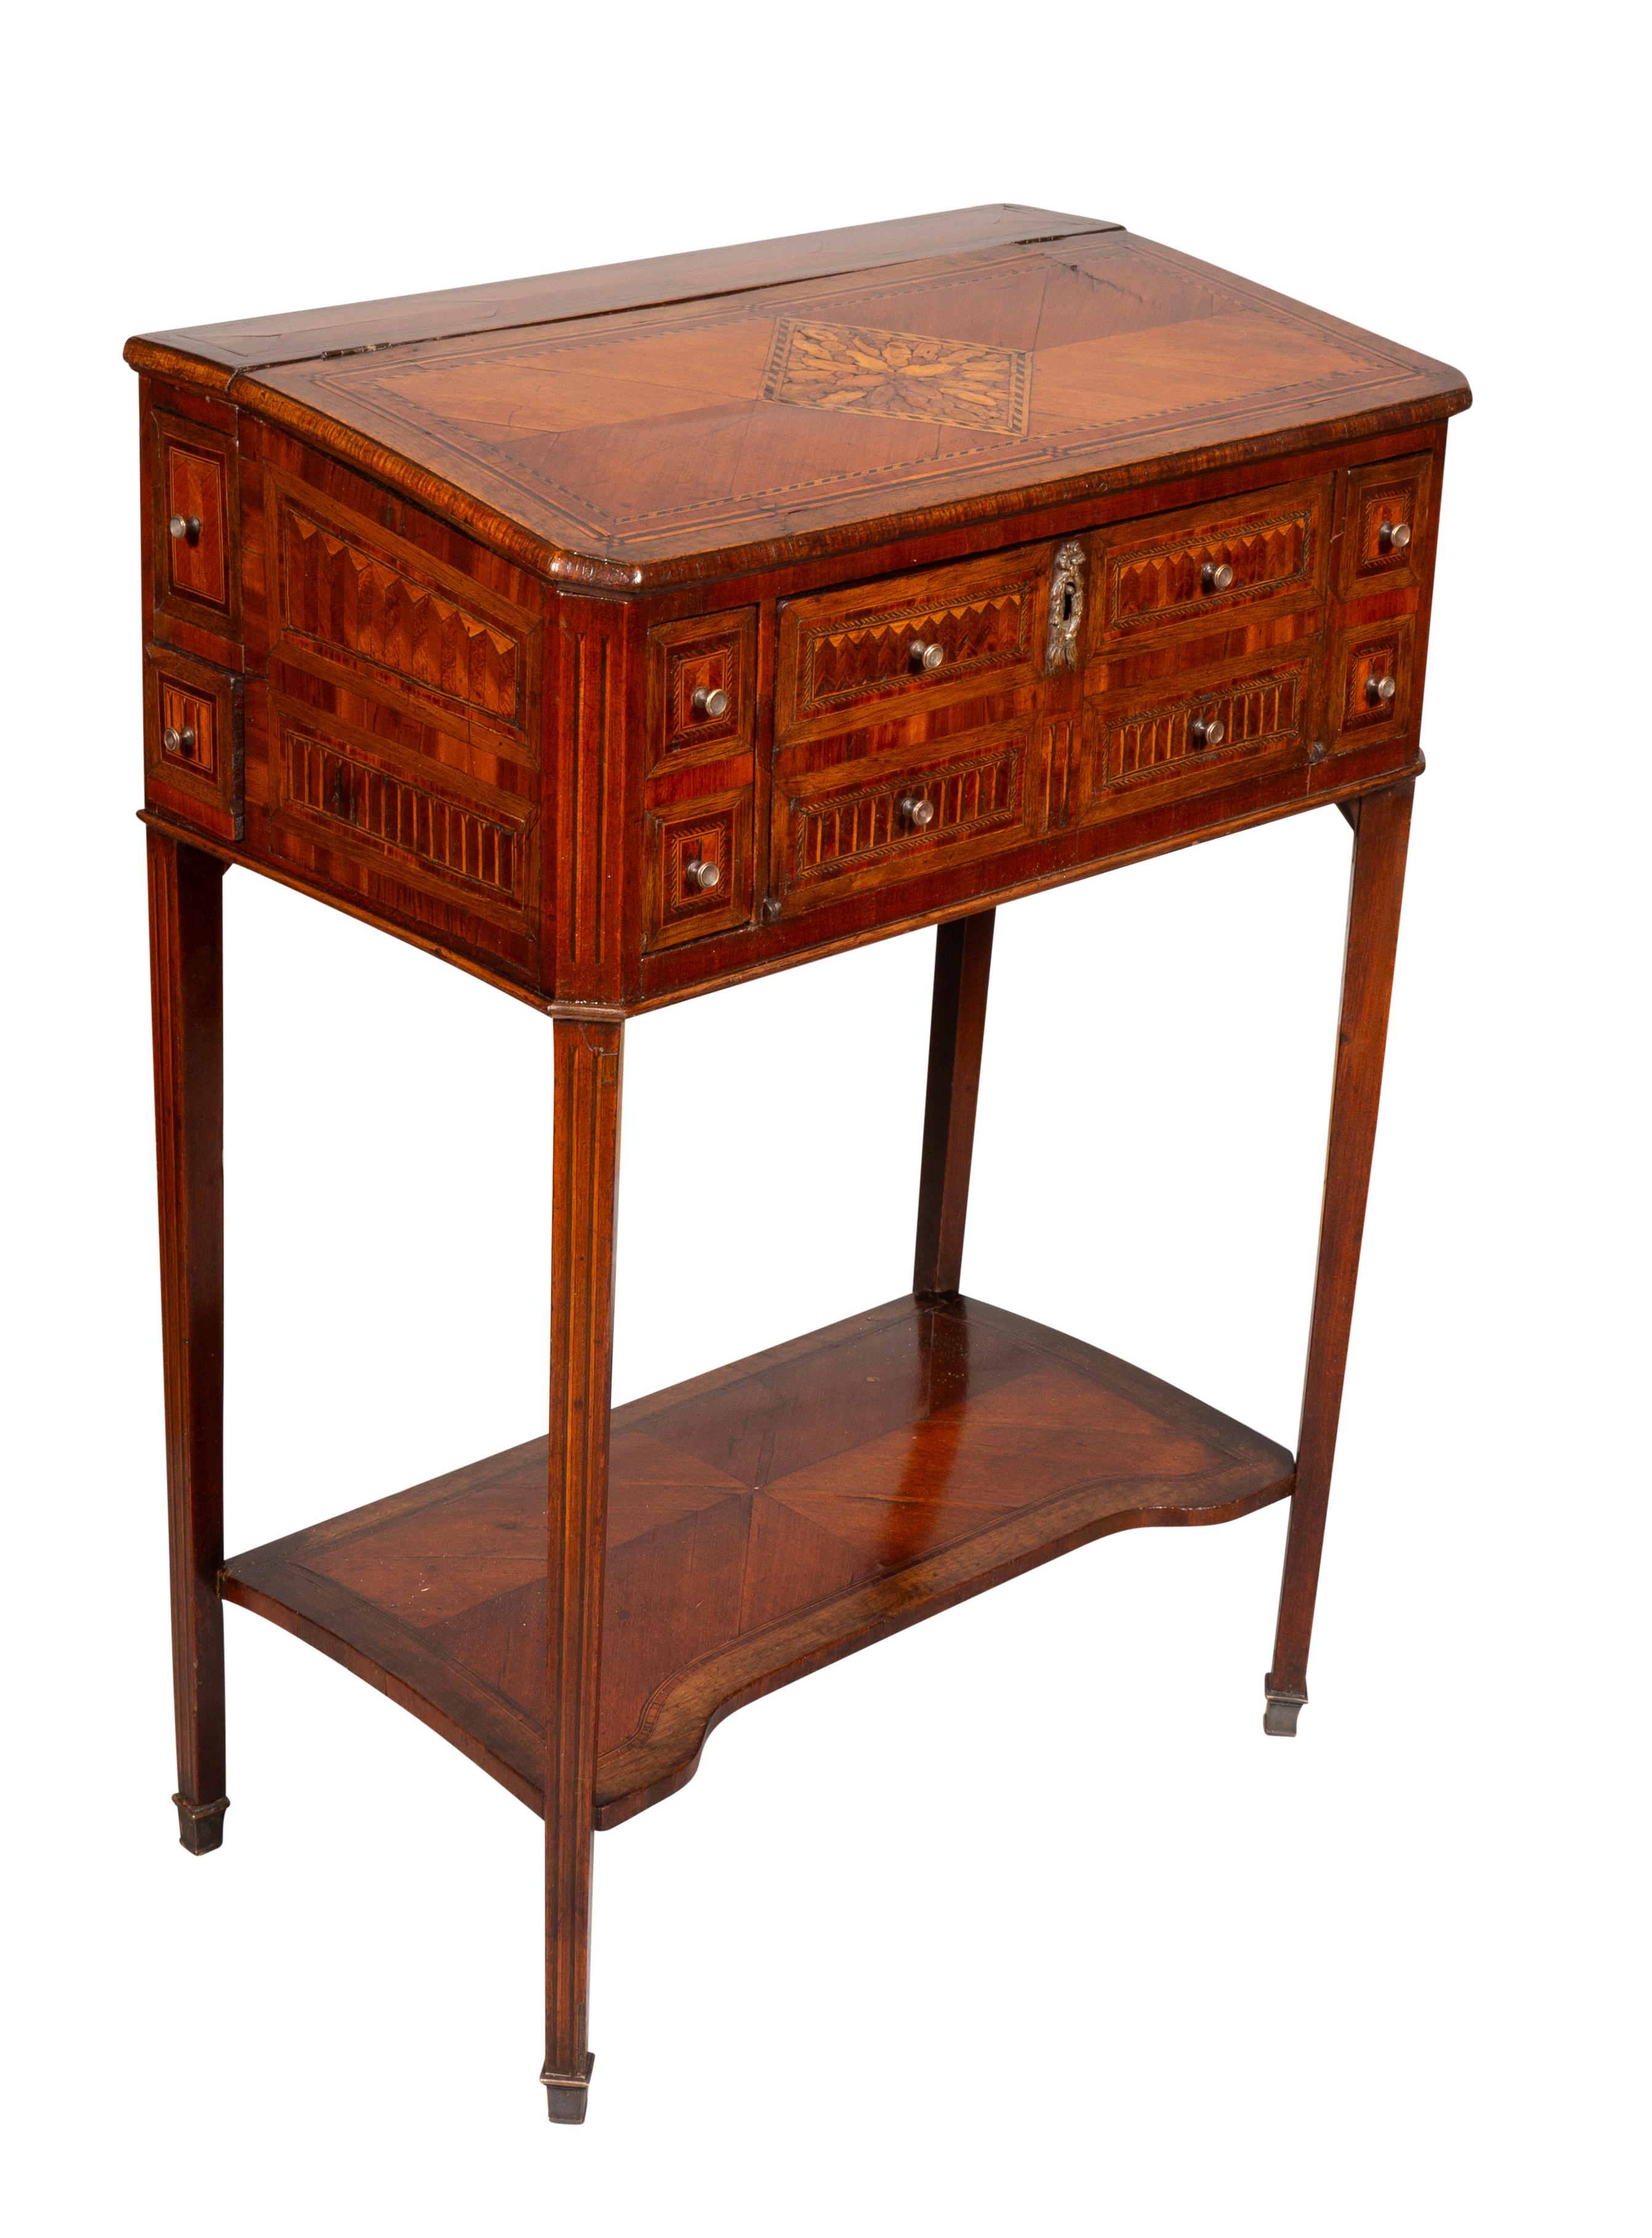 Small work table of small scale to decorate a hall way or a small space. With many drawers and compartments. Lower shelf. Sabot feet. J.P Morgan Provenance.